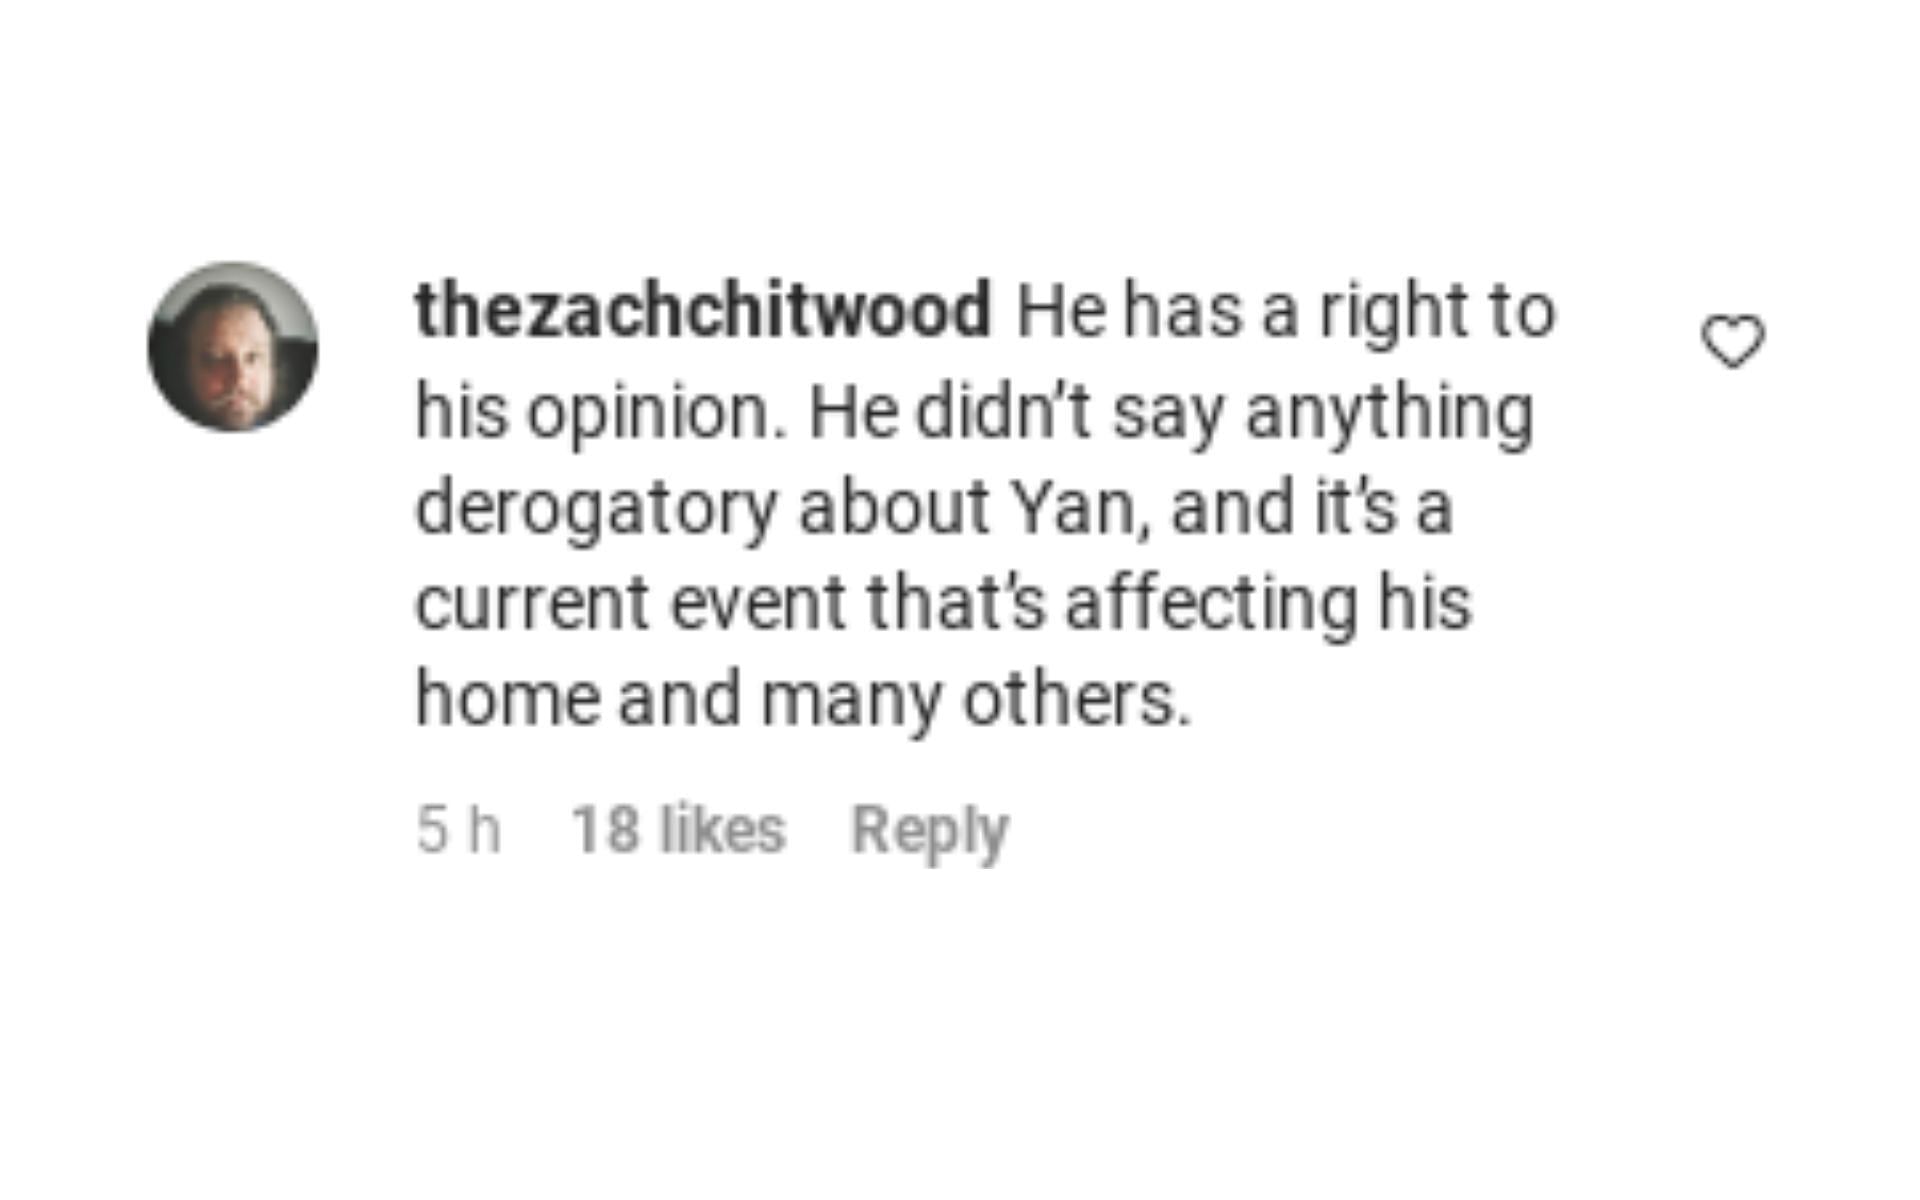 Another fan's comment